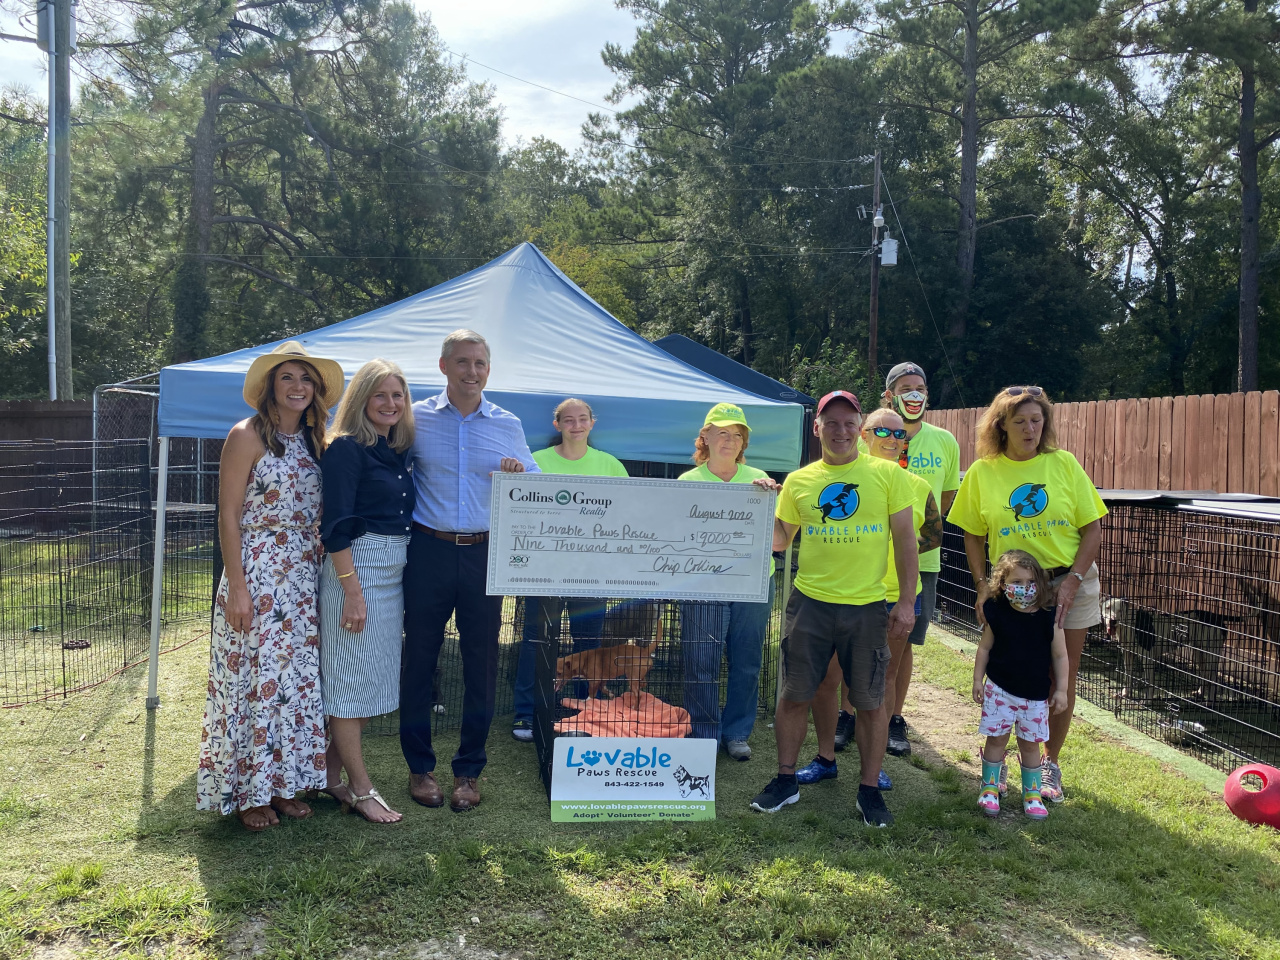 Pictured are Chip Collins, owner of Collins Group Realty, and his wife Carrie Collins, Ashley Lindblad, Director of Marketing and Community Relations of Collins Group Realty, Steve Allen, Director of Lovable Paws Rescue and members of his volunteer team.